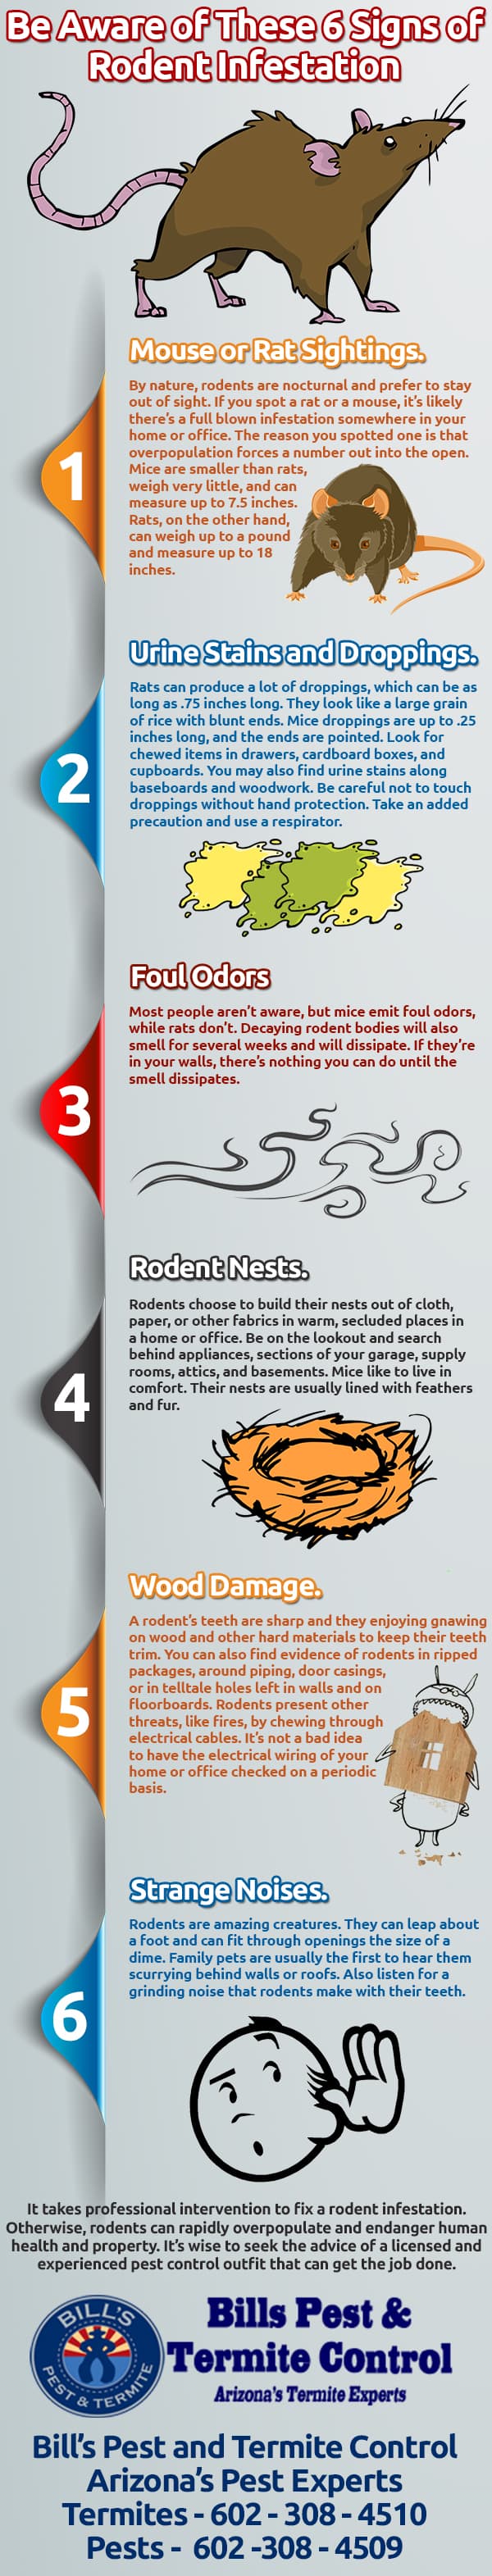 infographic-134 Be Aware of these 6 Signs of Rodent Infestation